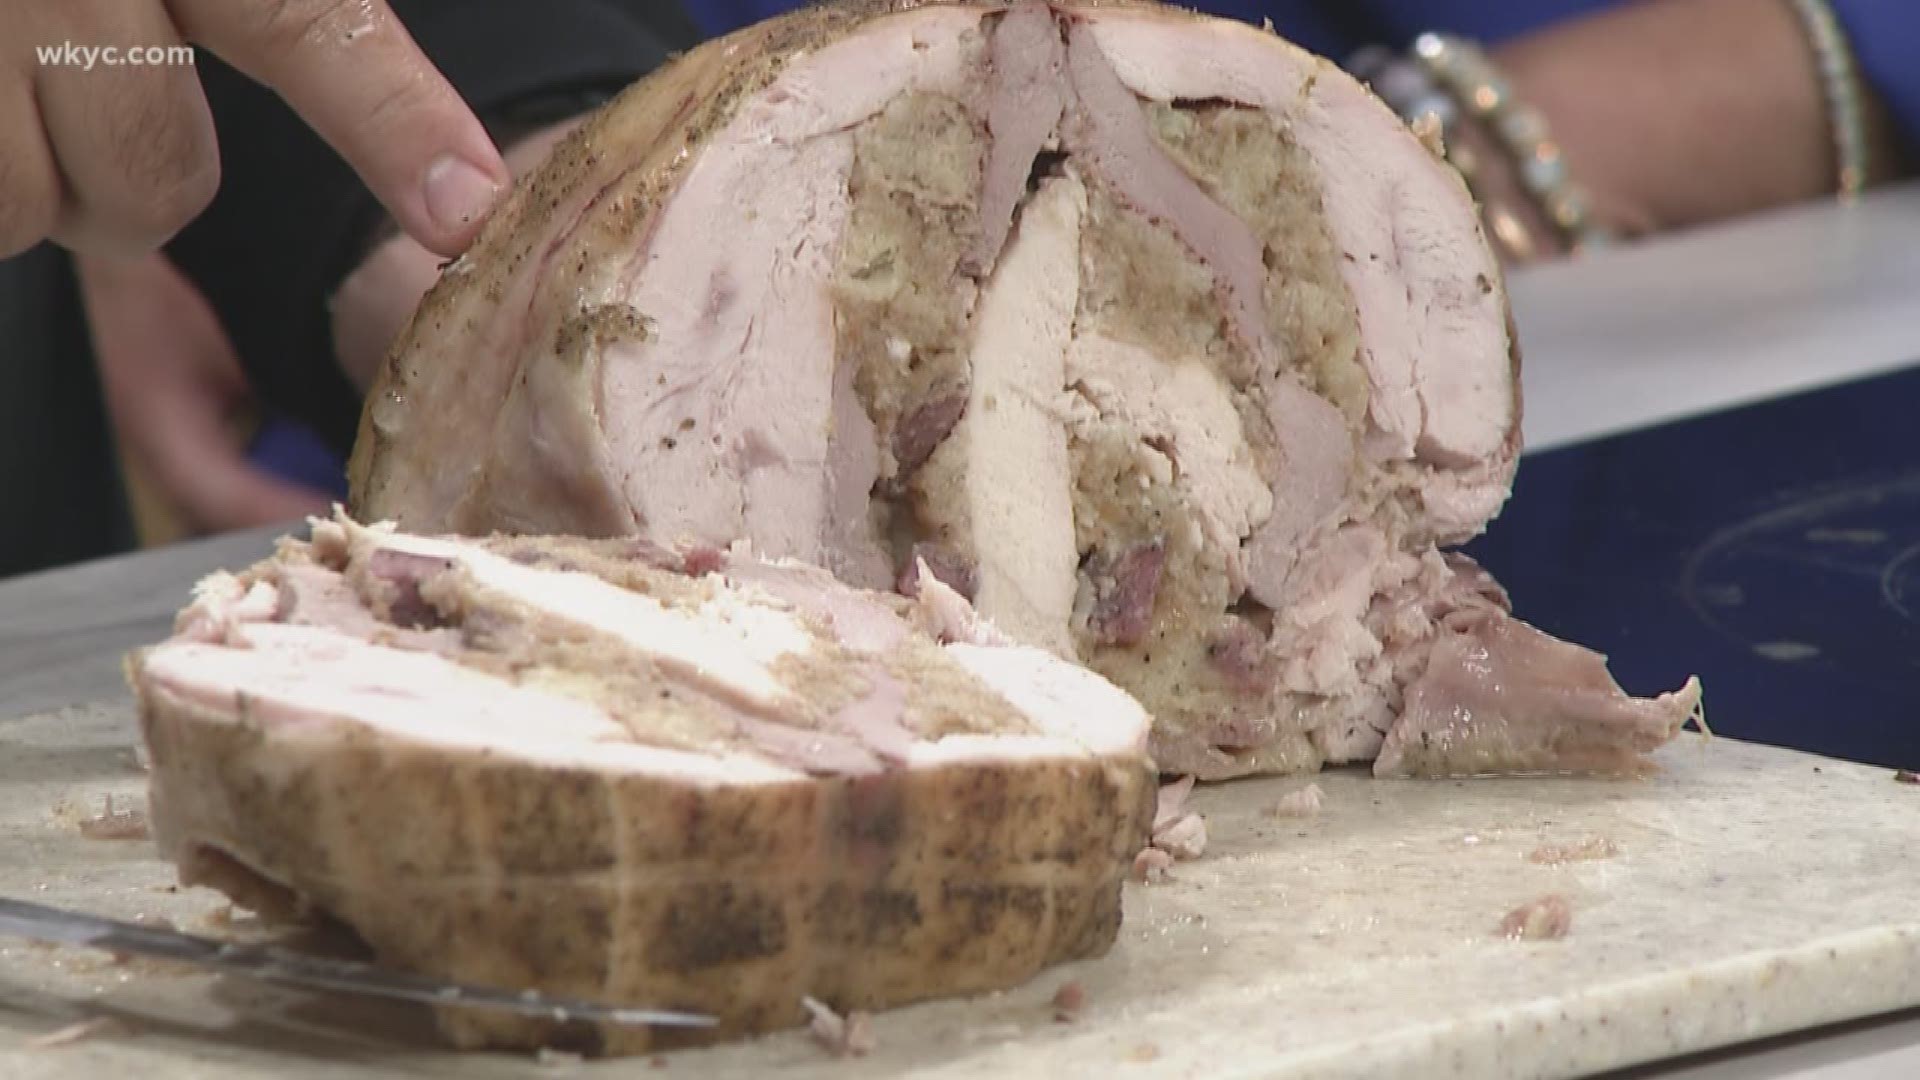 Nov. 16, 2018: Members of our team try turducken for the first time ever thanks to Catullo Prime Meats.